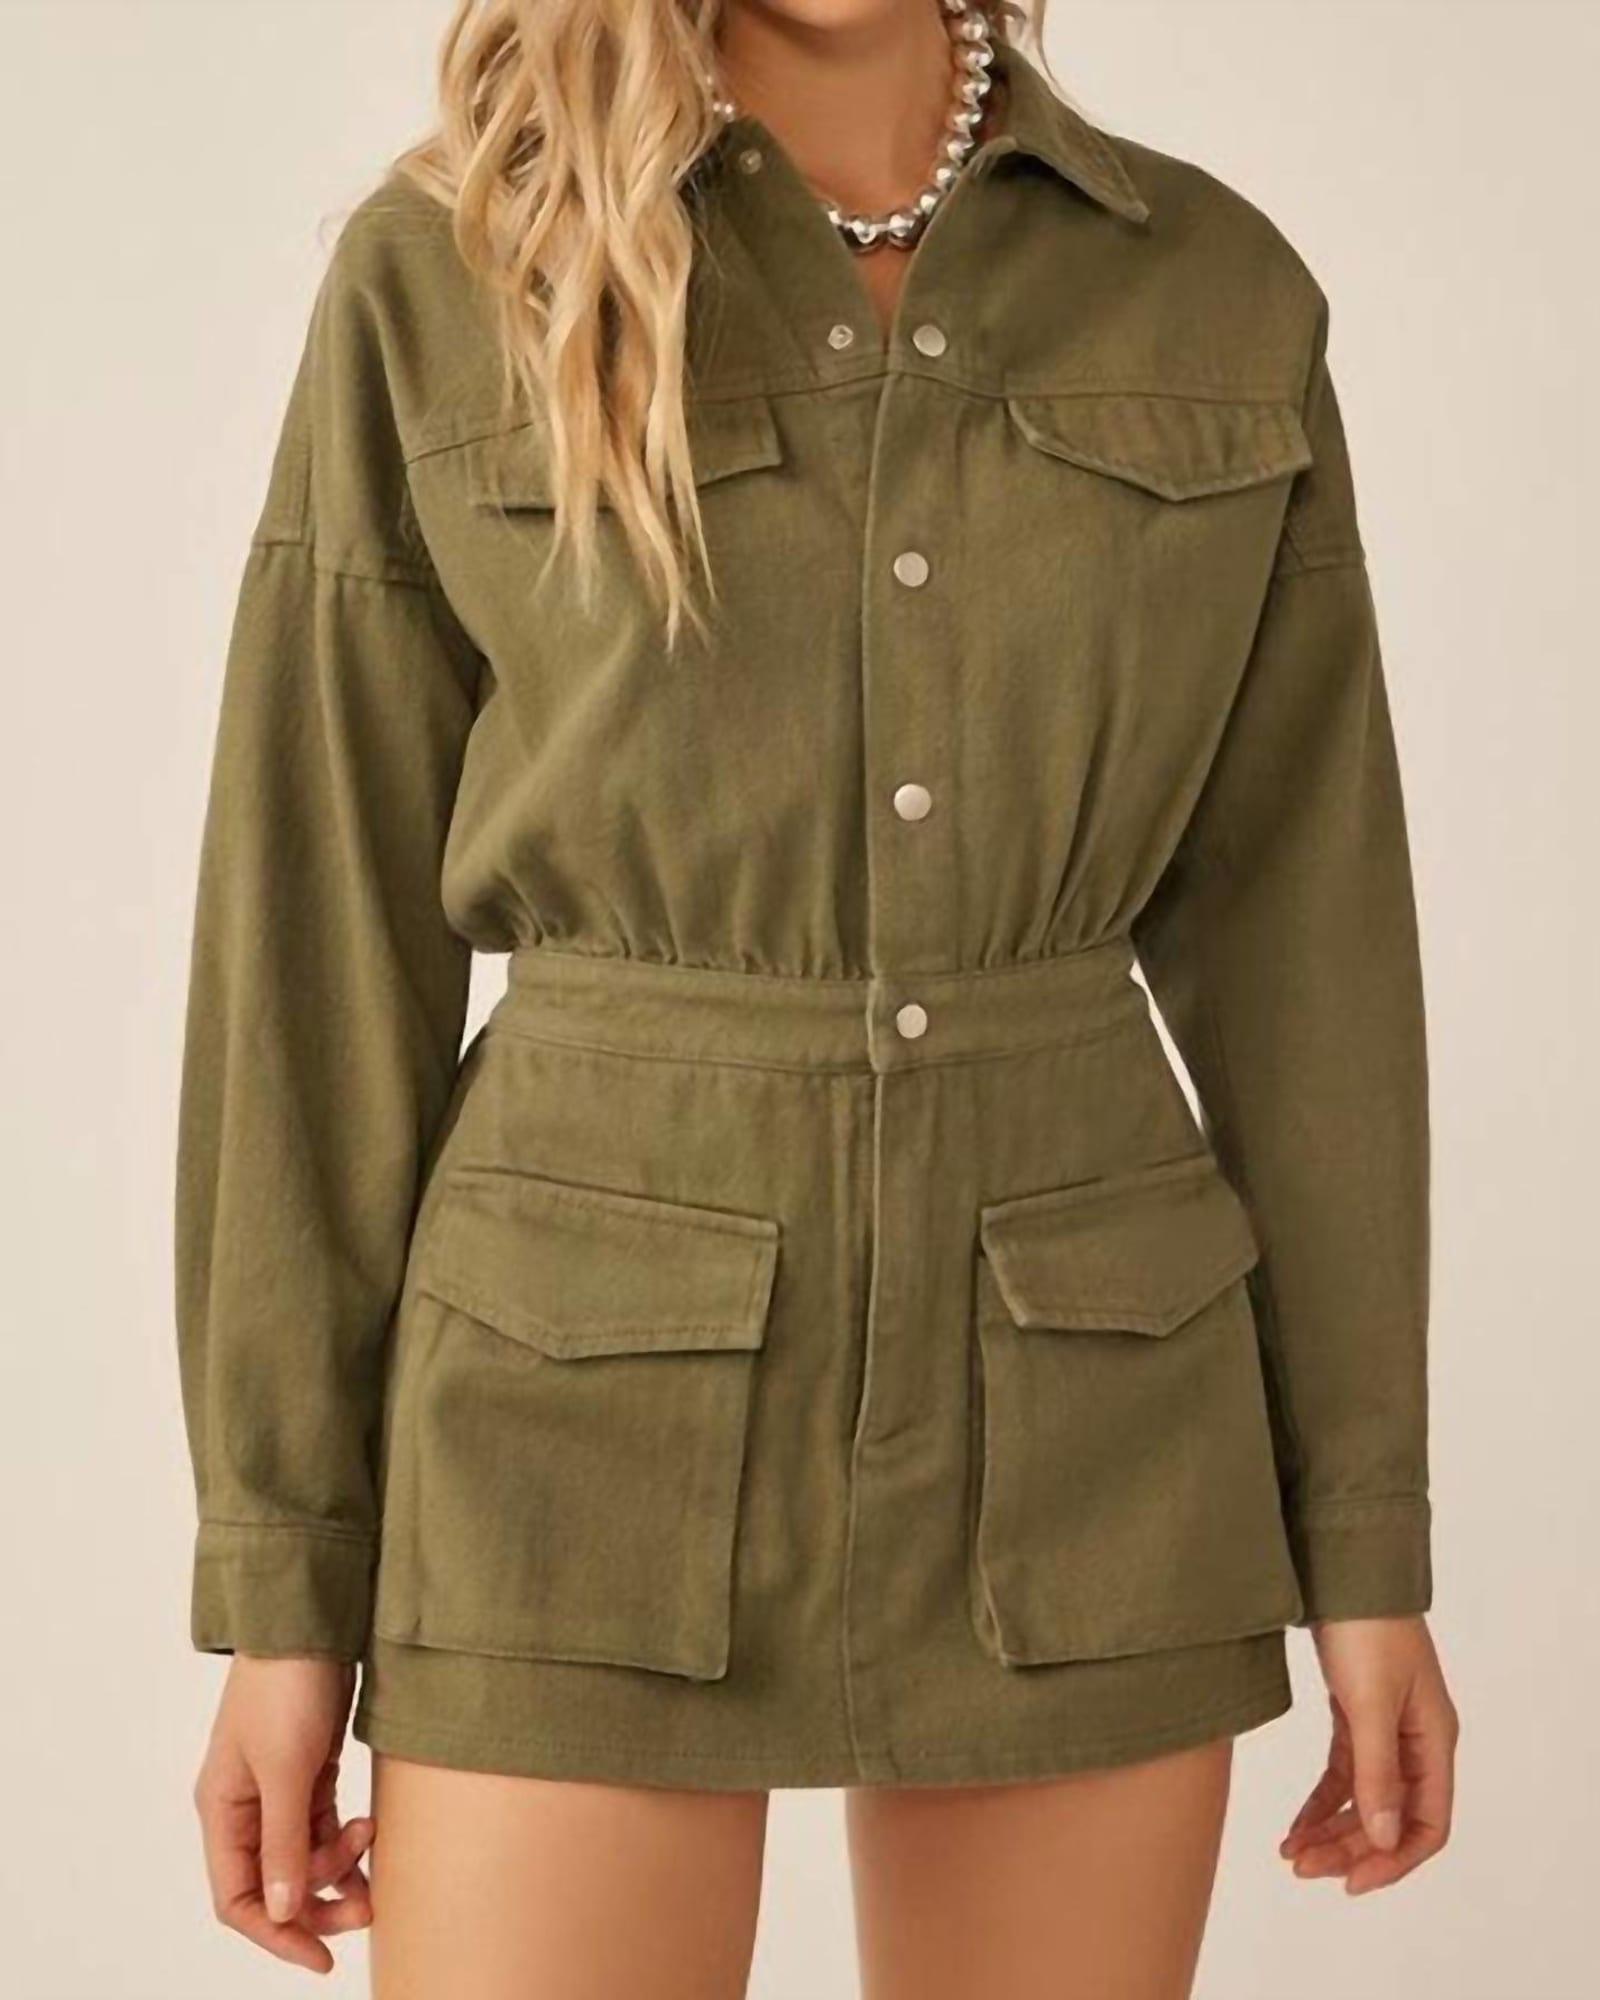 Keep It Cute Romper In Olive | Olive